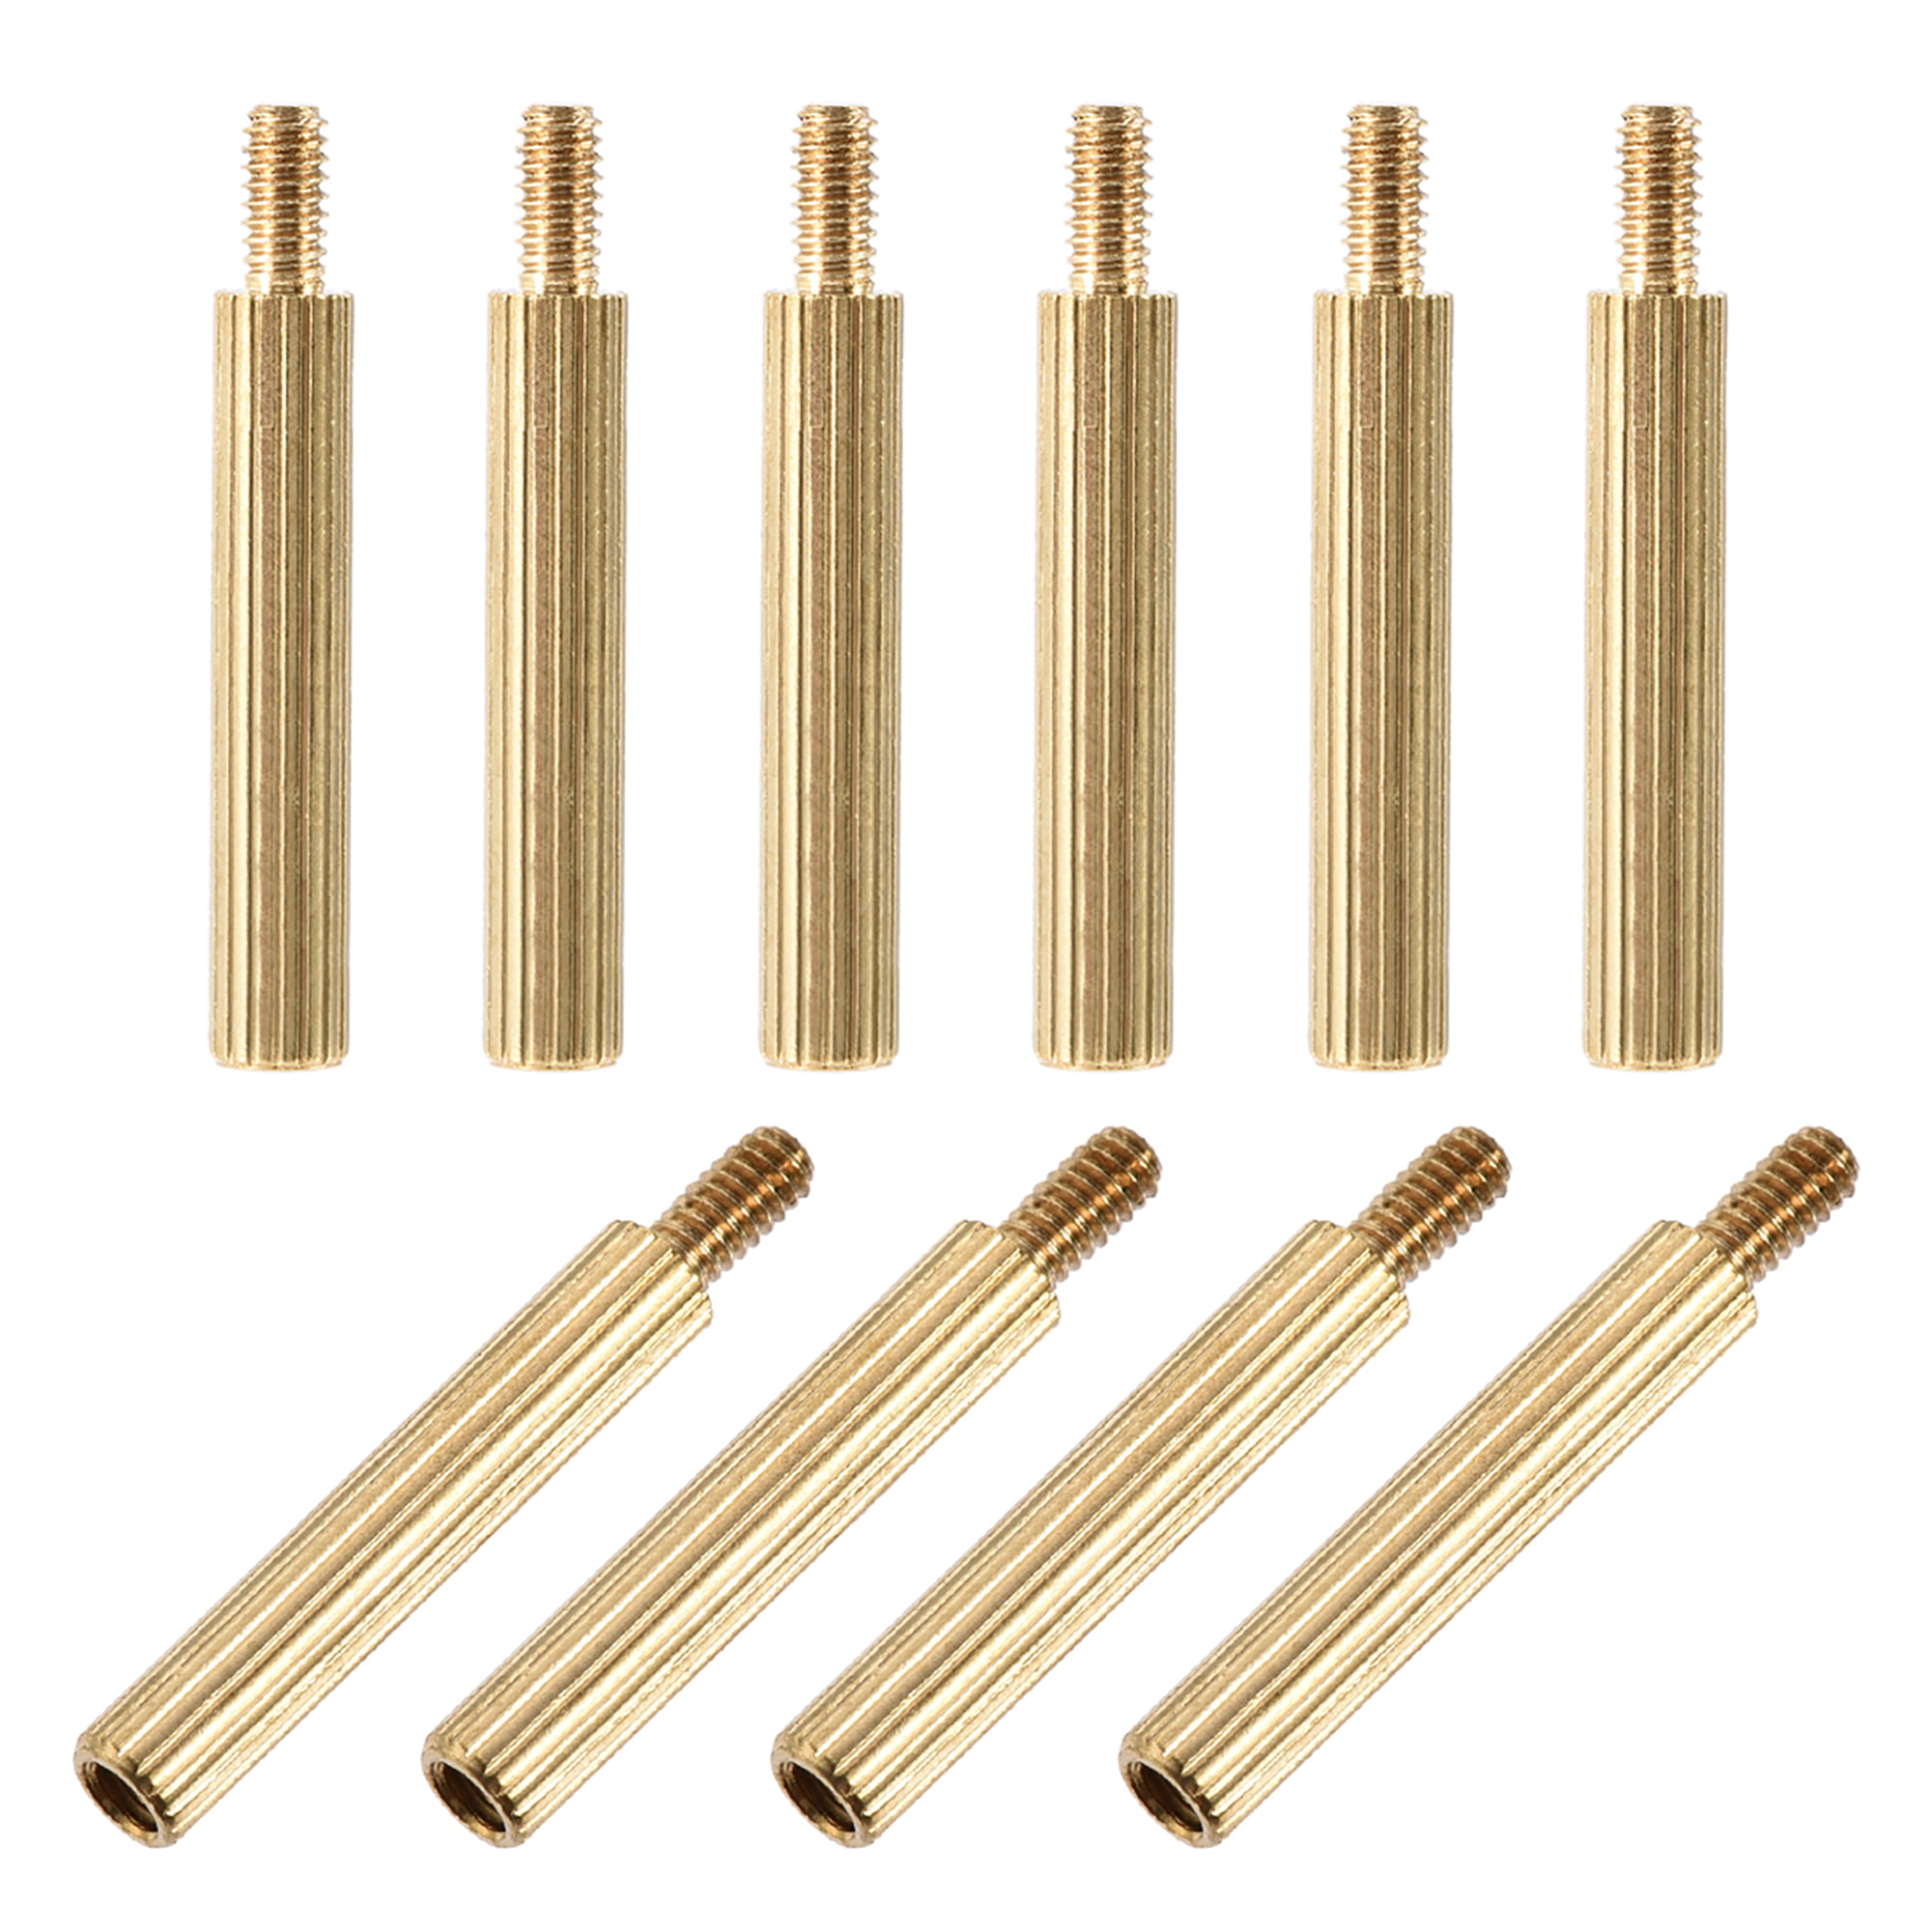 M2*3+3-M2*25+3 Knurled Spacer Stand-Off Male-Female Brass Threaded HOT 